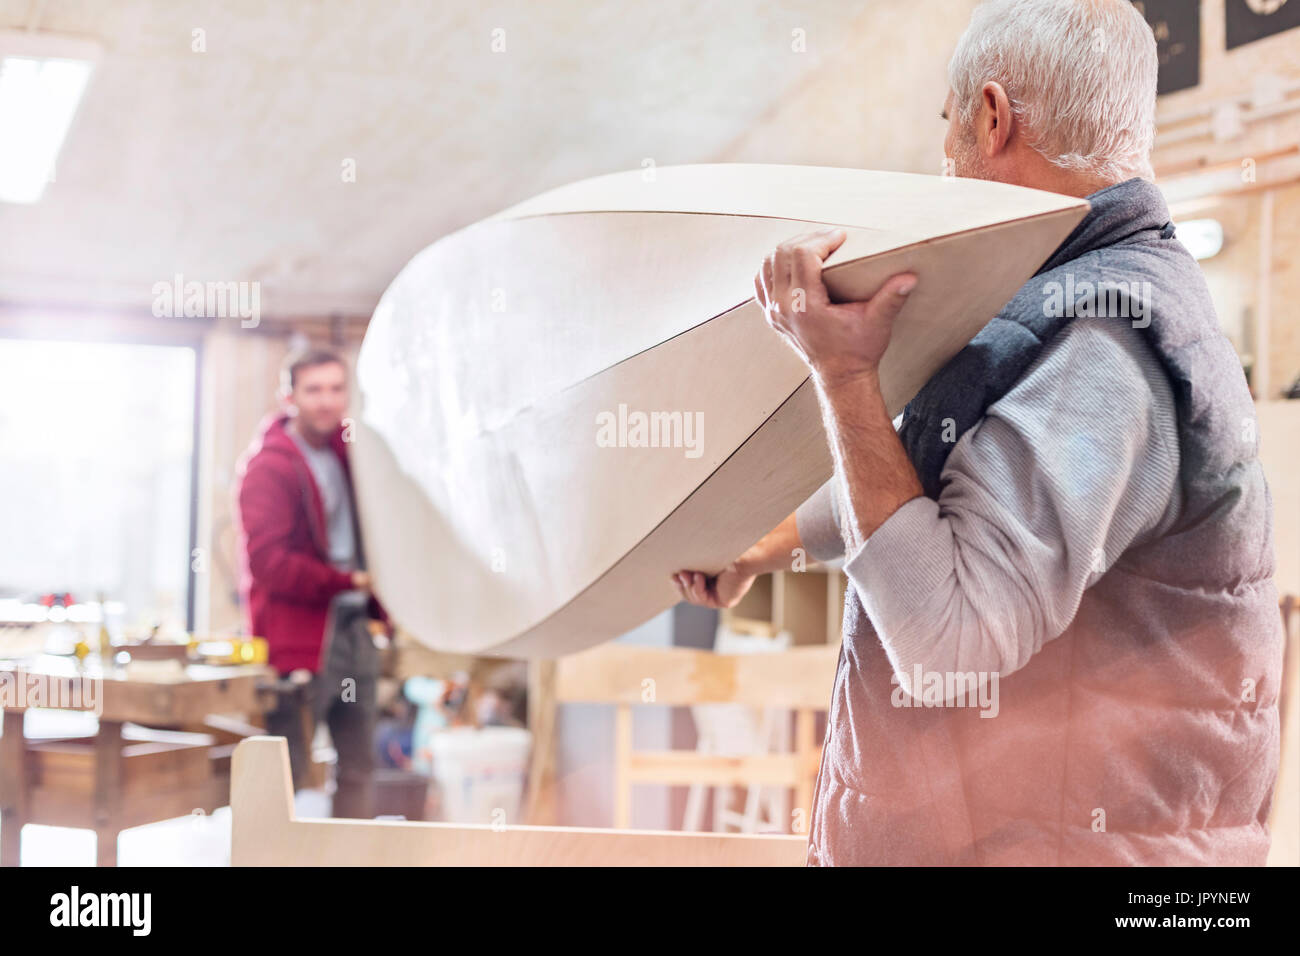 Male carpenters carrying wood boat in workshop Stock Photo